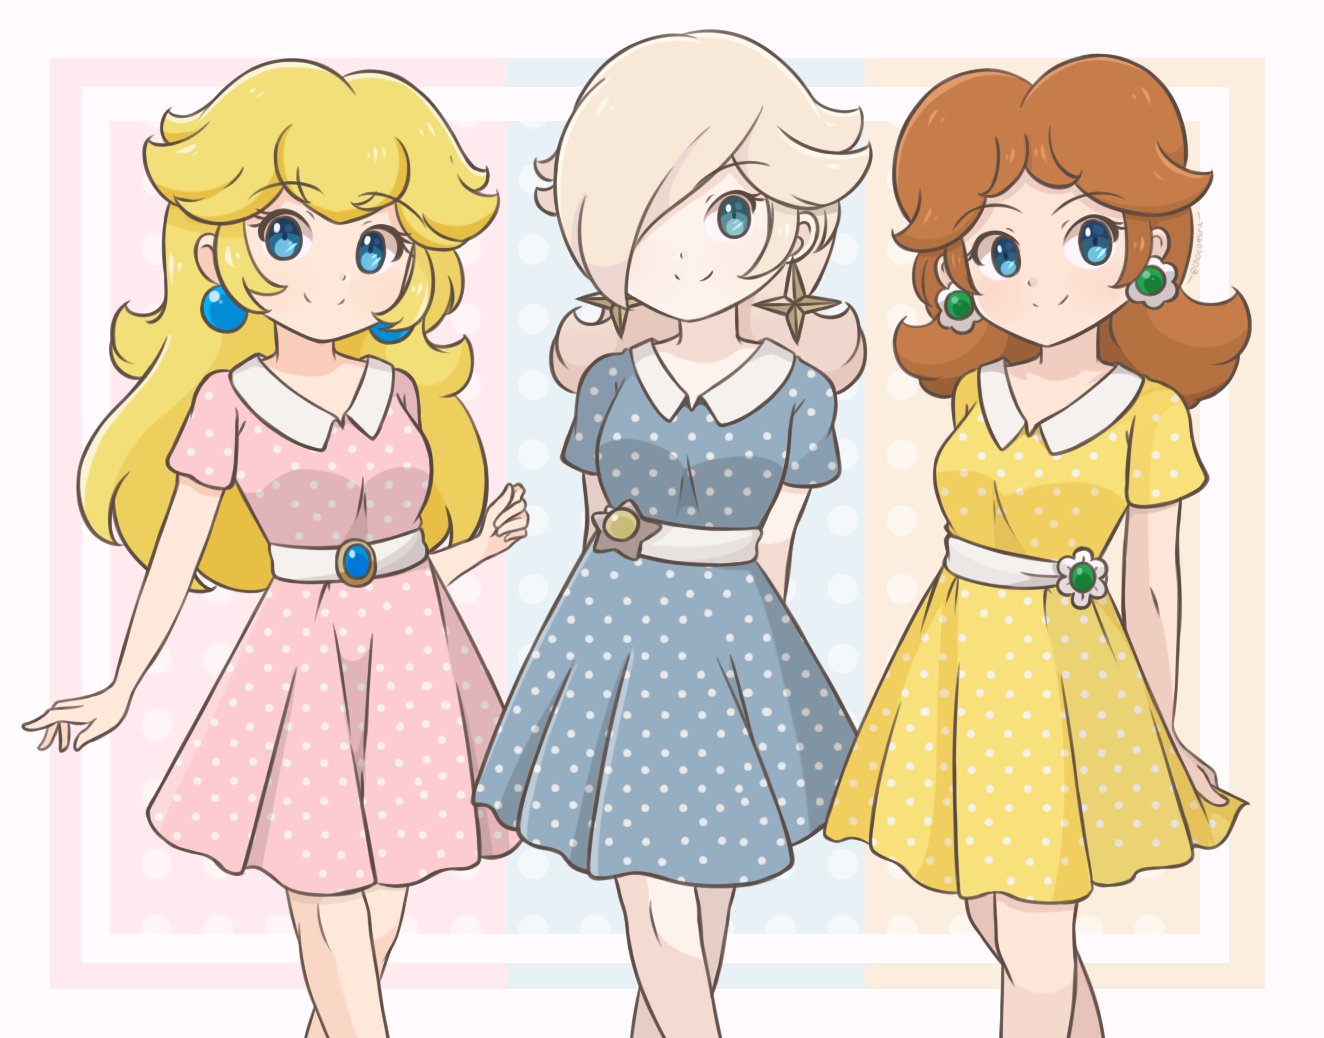 3girls alternate_costume artist_name blue_dress blue_eyes casual chocomiru closed_mouth crown crown_removed dress earrings eyebrows_visible_through_hair jewelry long_hair looking_at_viewer multiple_girls pink_dress polka_dot polka_dot_background princess_daisy princess_peach smile super_mario_bros. super_mario_galaxy super_mario_galaxy_2 super_smash_bros. yellow_dress